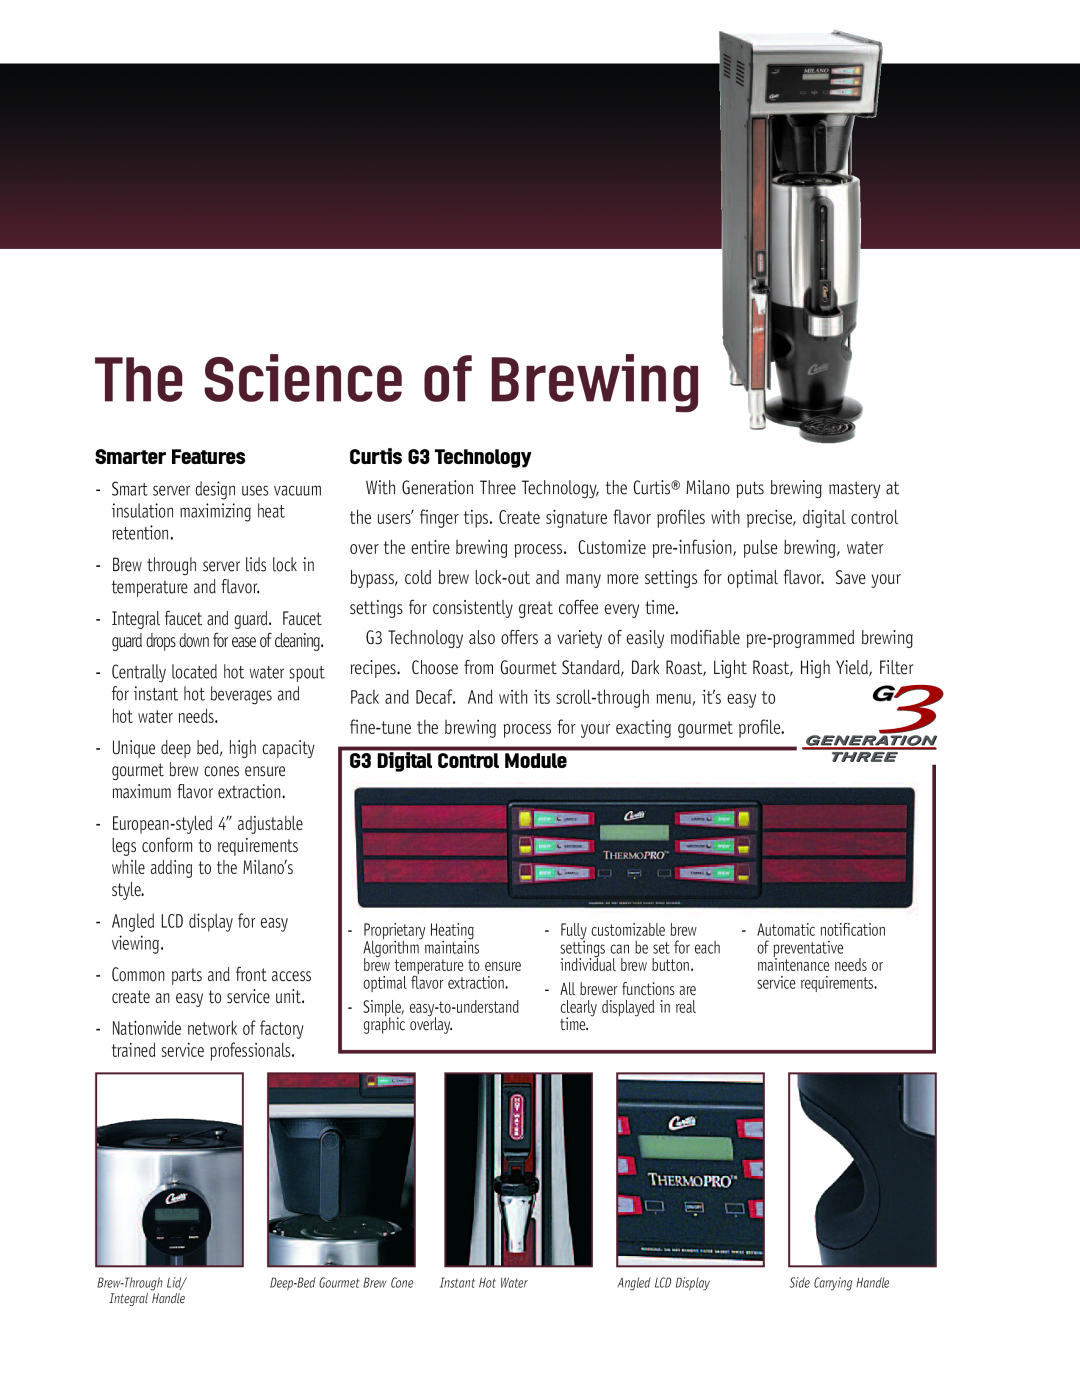 Wibur Curtis Company TPC15T The Science of Brewing, Smarter Features, Curtis G3 Technology, G3 Digital Control Module 